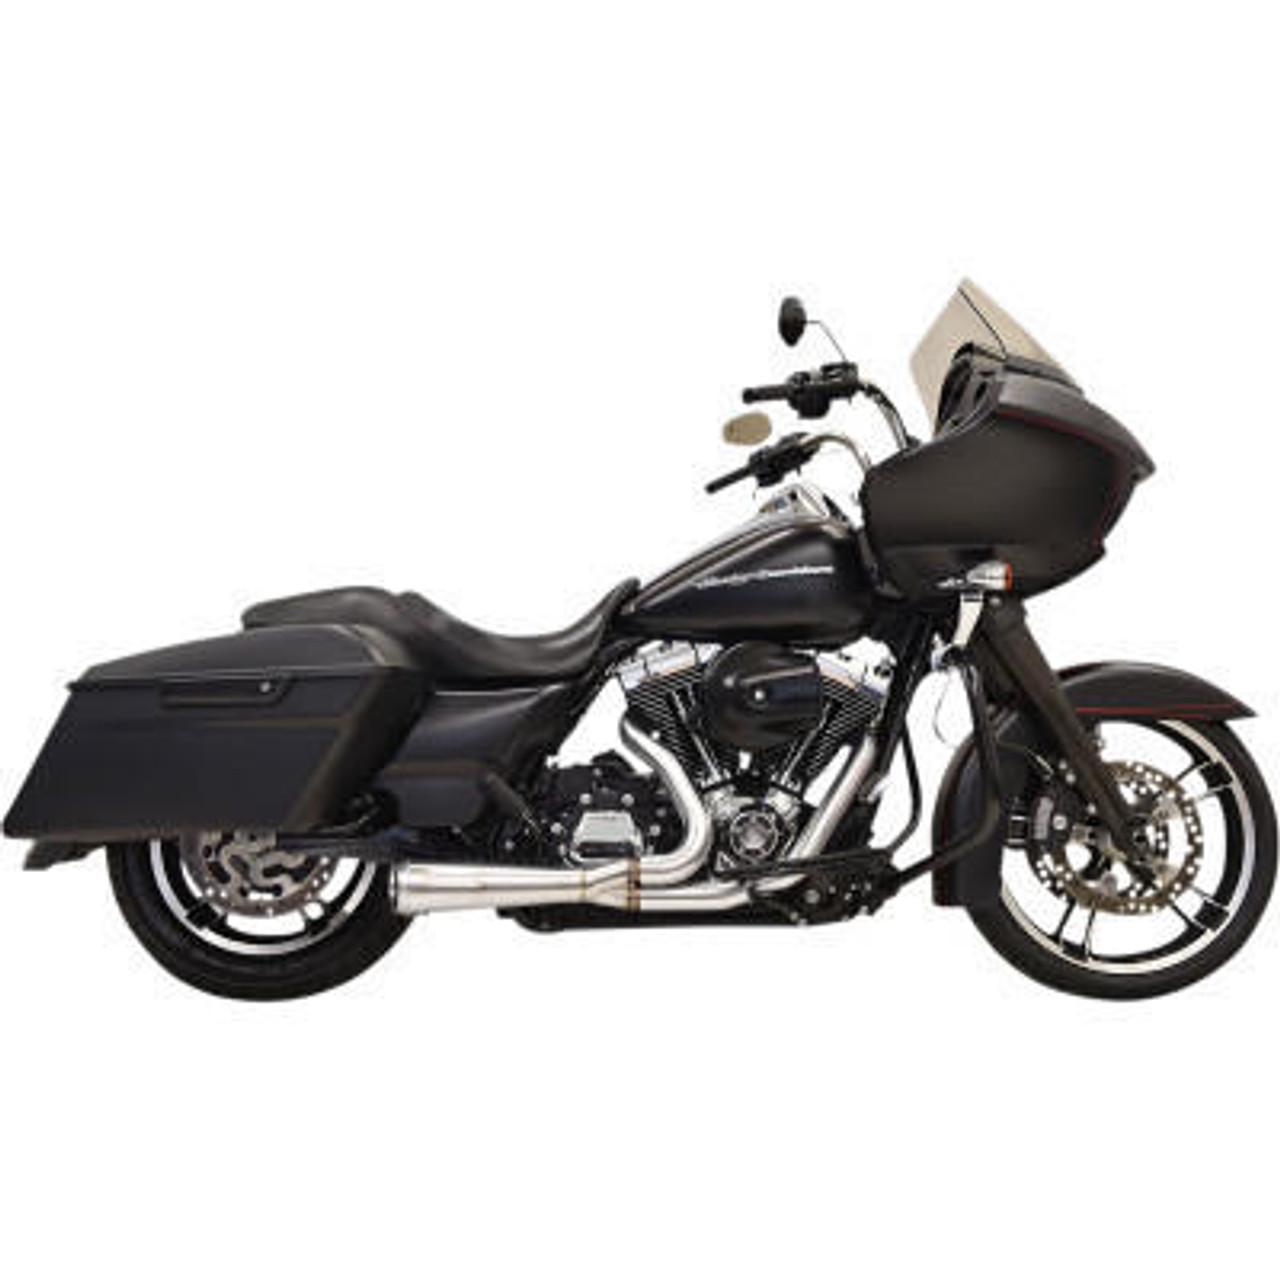 Bassani Short Road Rage 2-into-1 Exhaust System